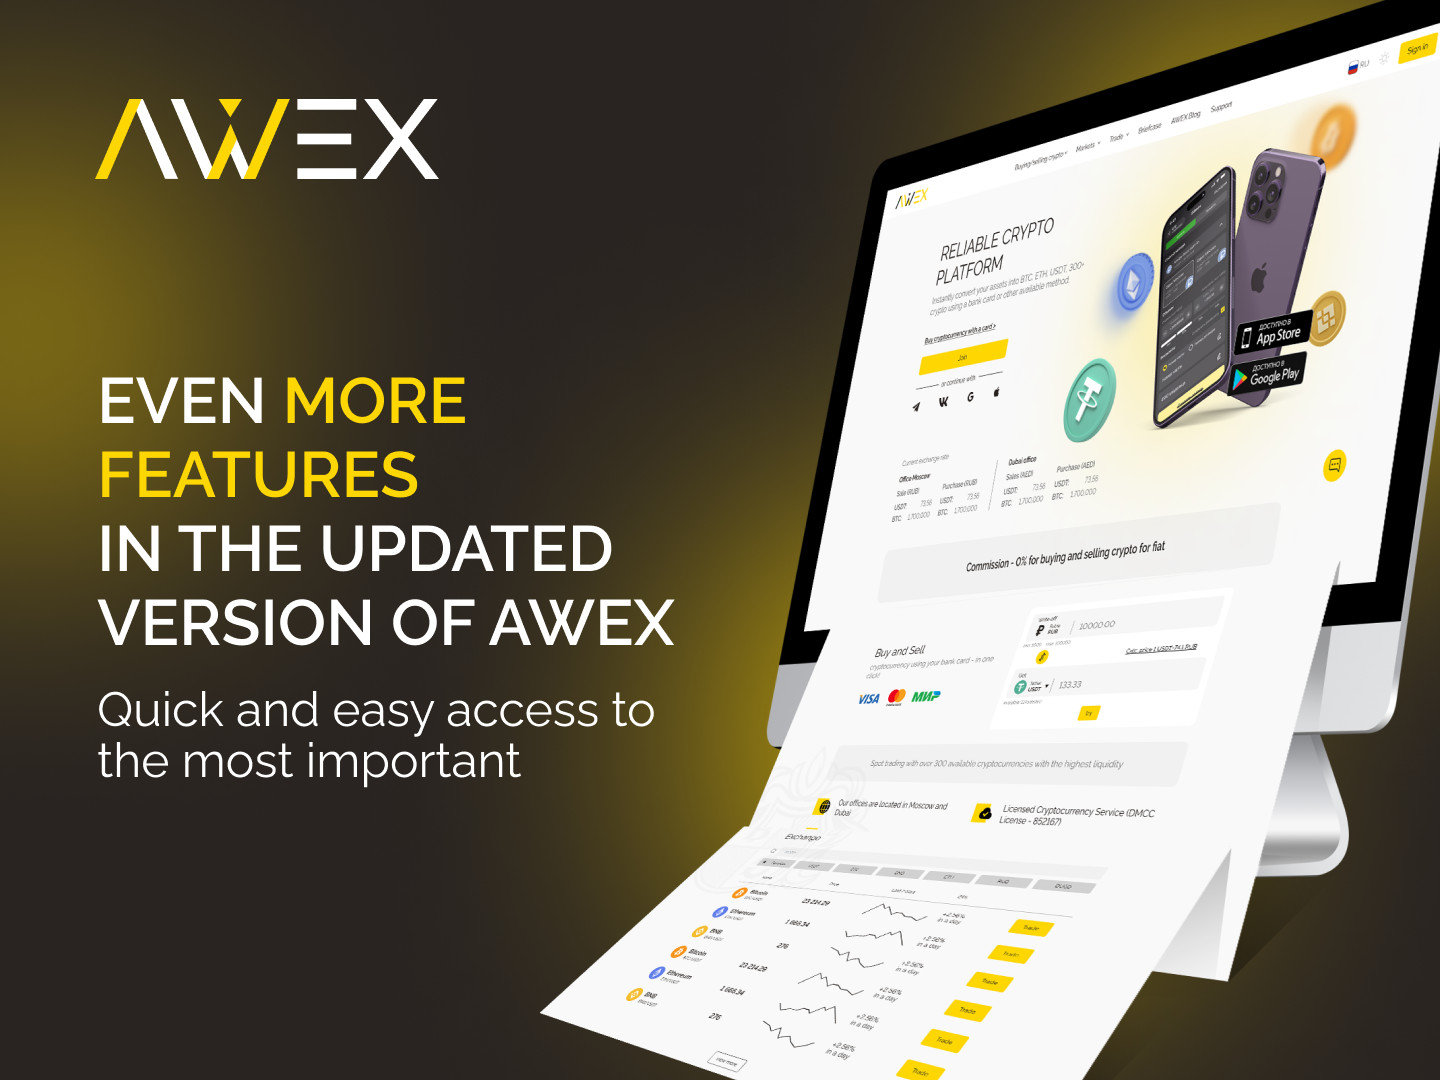 Functionality update on AWEX